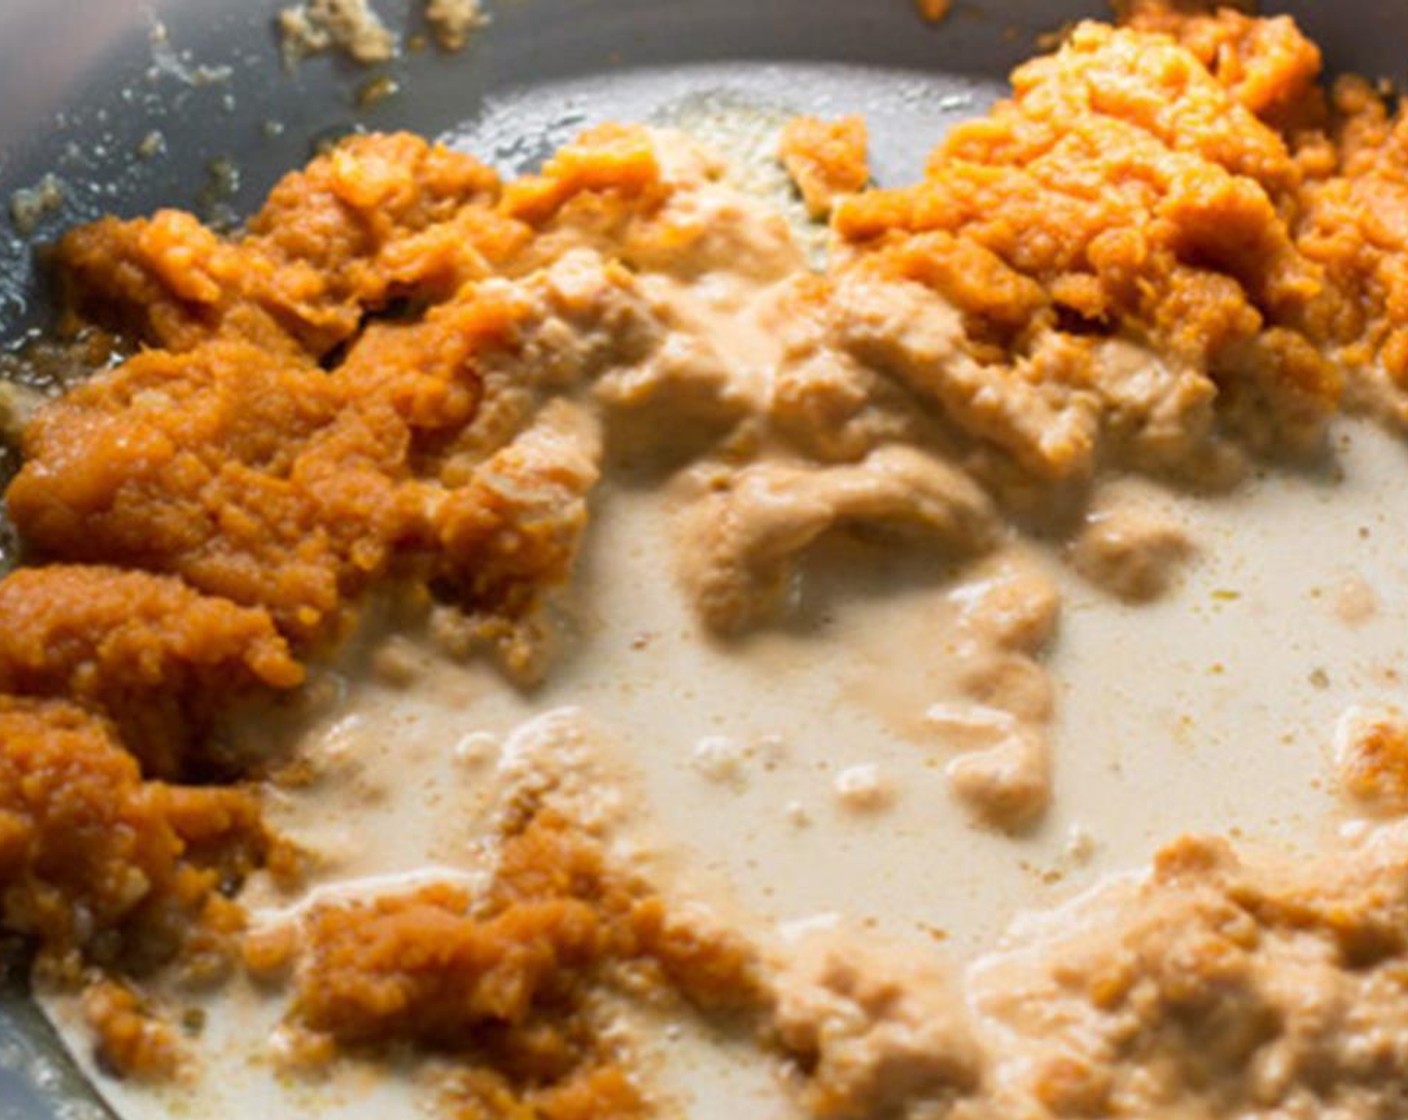 step 2 In a large skillet, melt Butter (2 Tbsp) over medium heat and cook Garlic (3 cloves) for about 30 seconds. Whisk in the Canned Pumpkin Purée (1 cup) and Half and Half (1 1/2 cups).